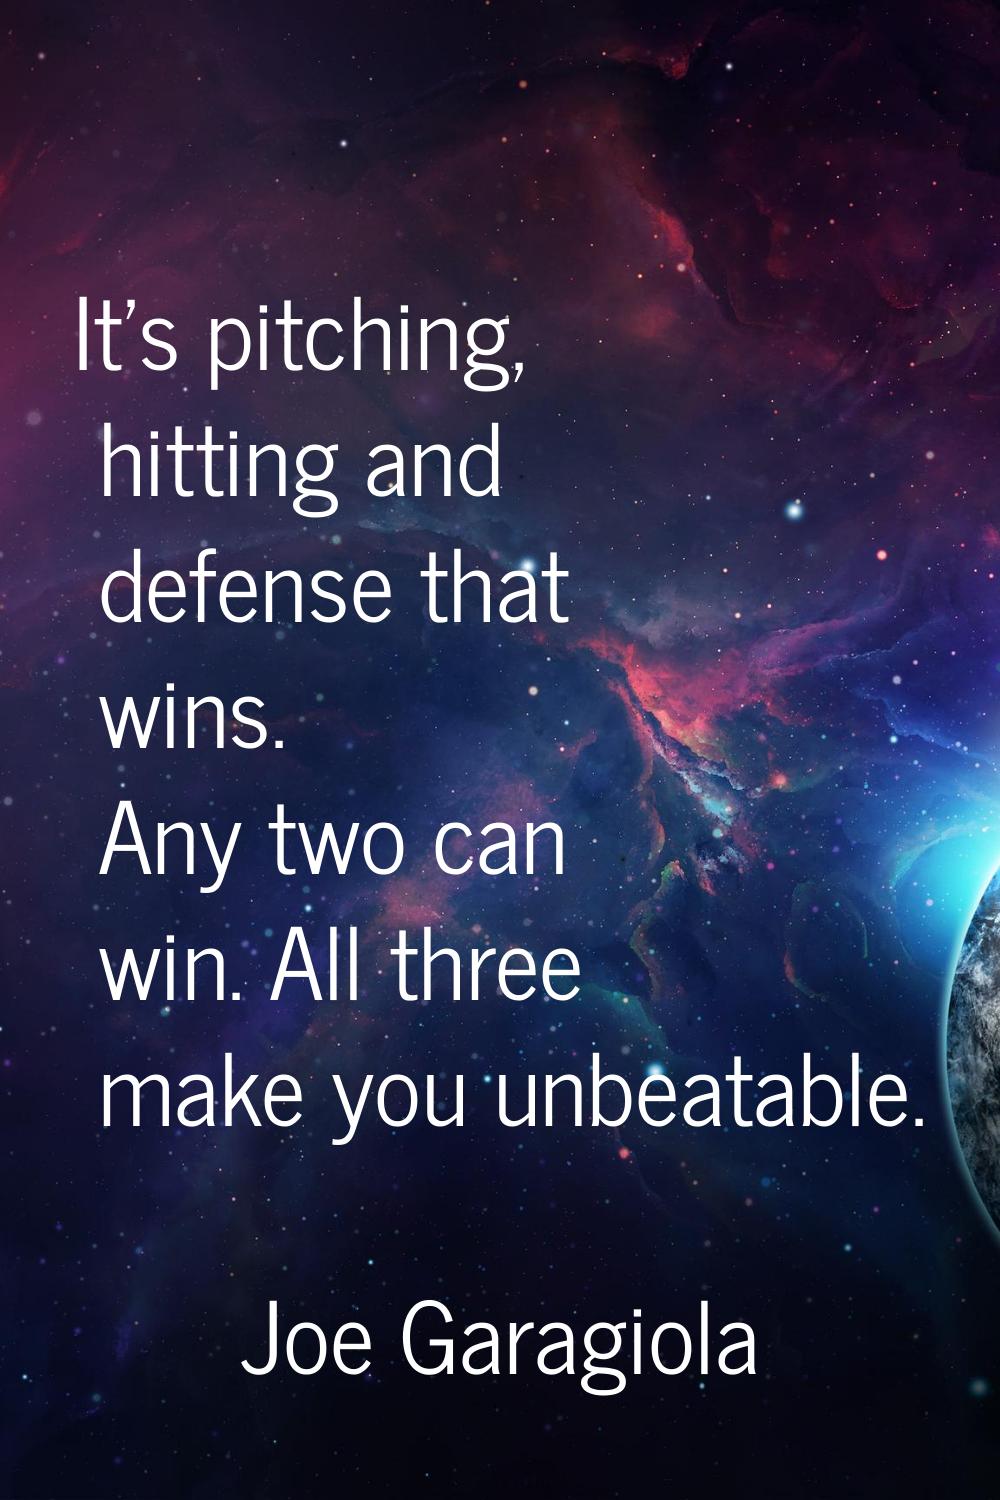 It's pitching, hitting and defense that wins. Any two can win. All three make you unbeatable.